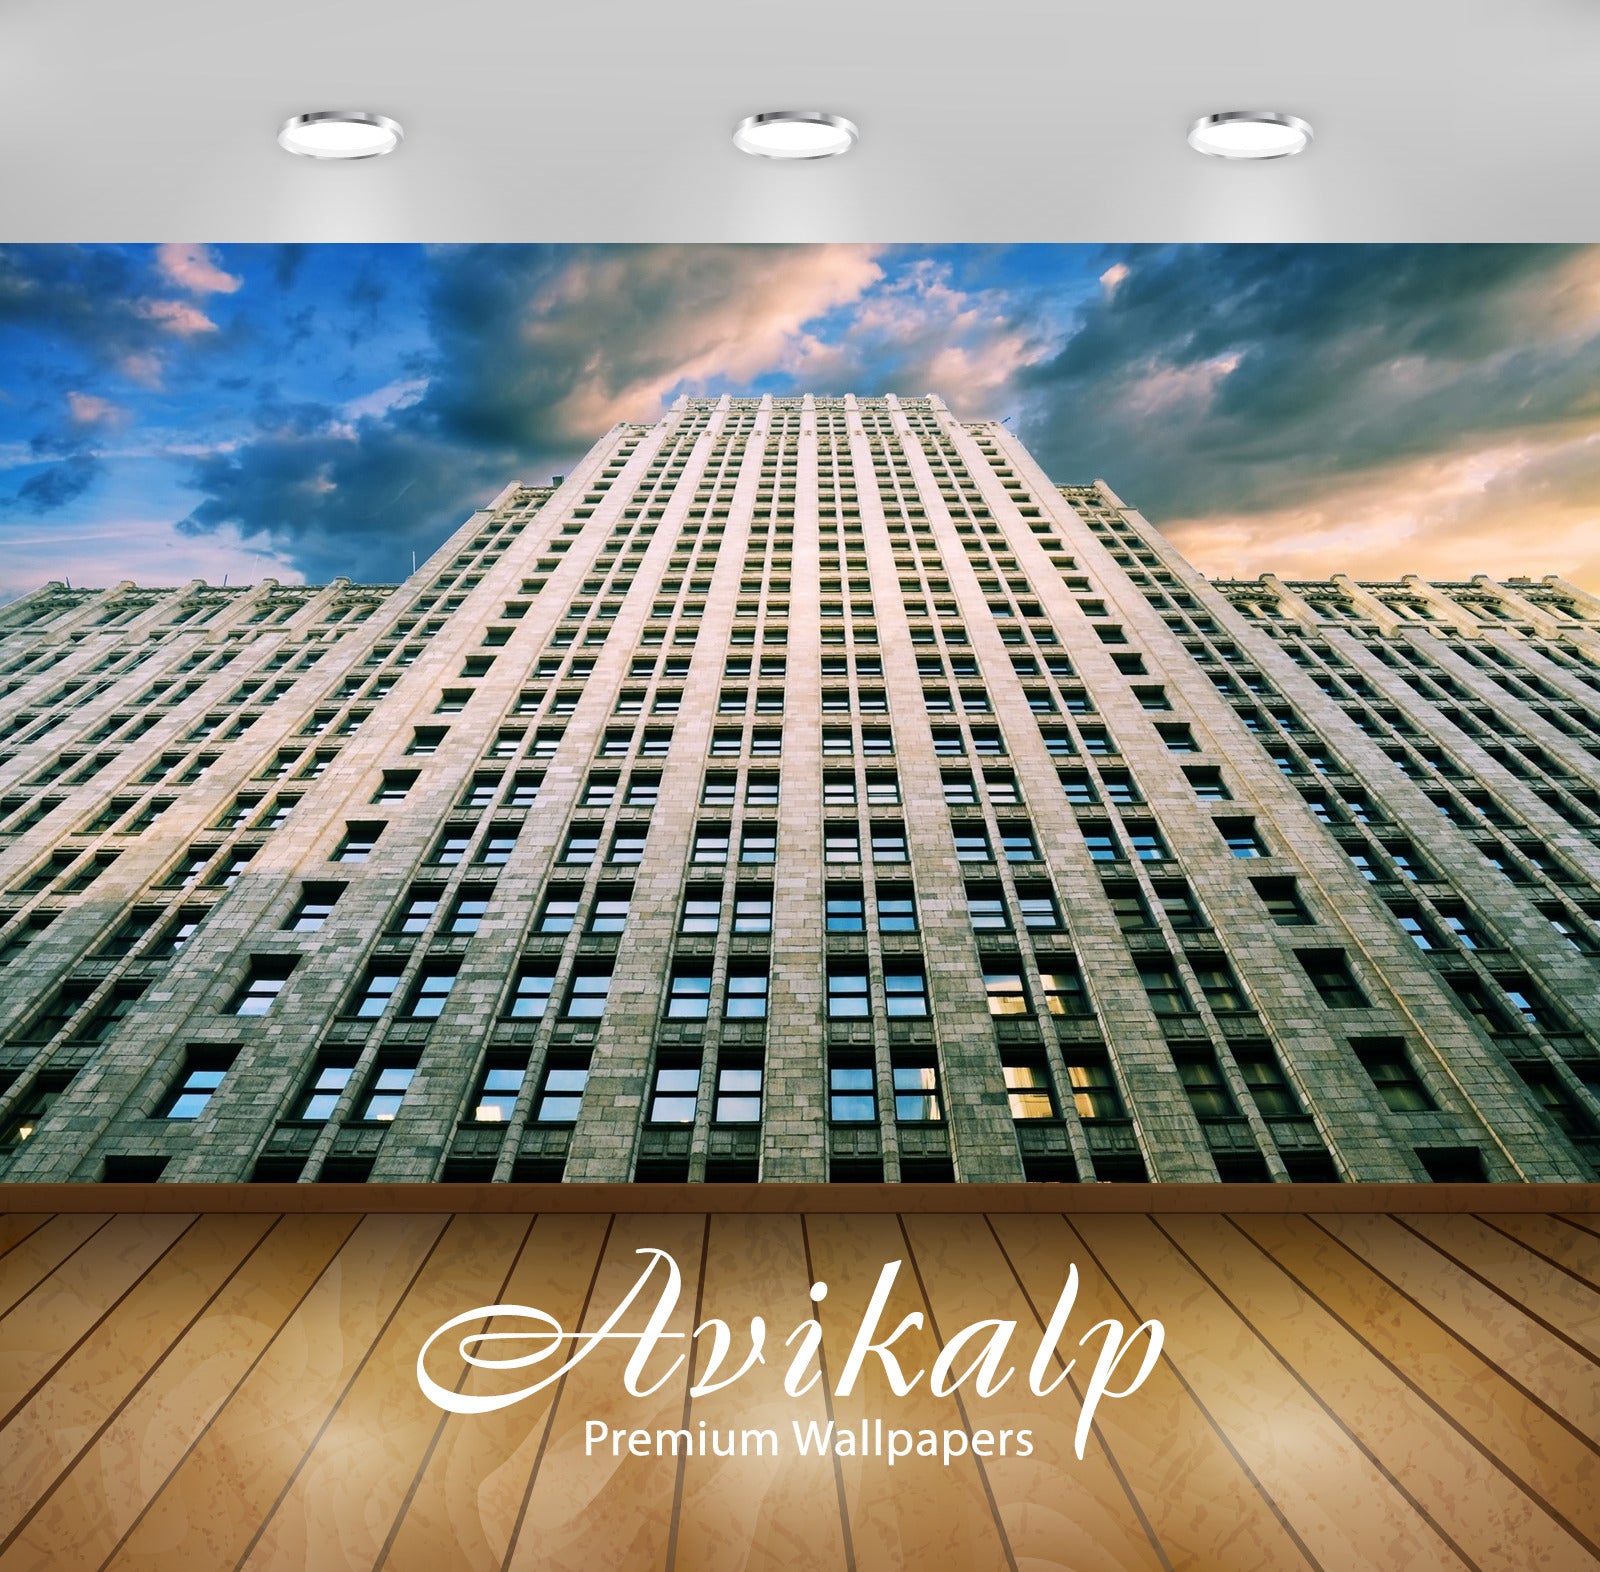 Avikalp Exclusive Awi1935 Empire State Building Windows Full HD Wallpapers for Living room, Hall, Ki